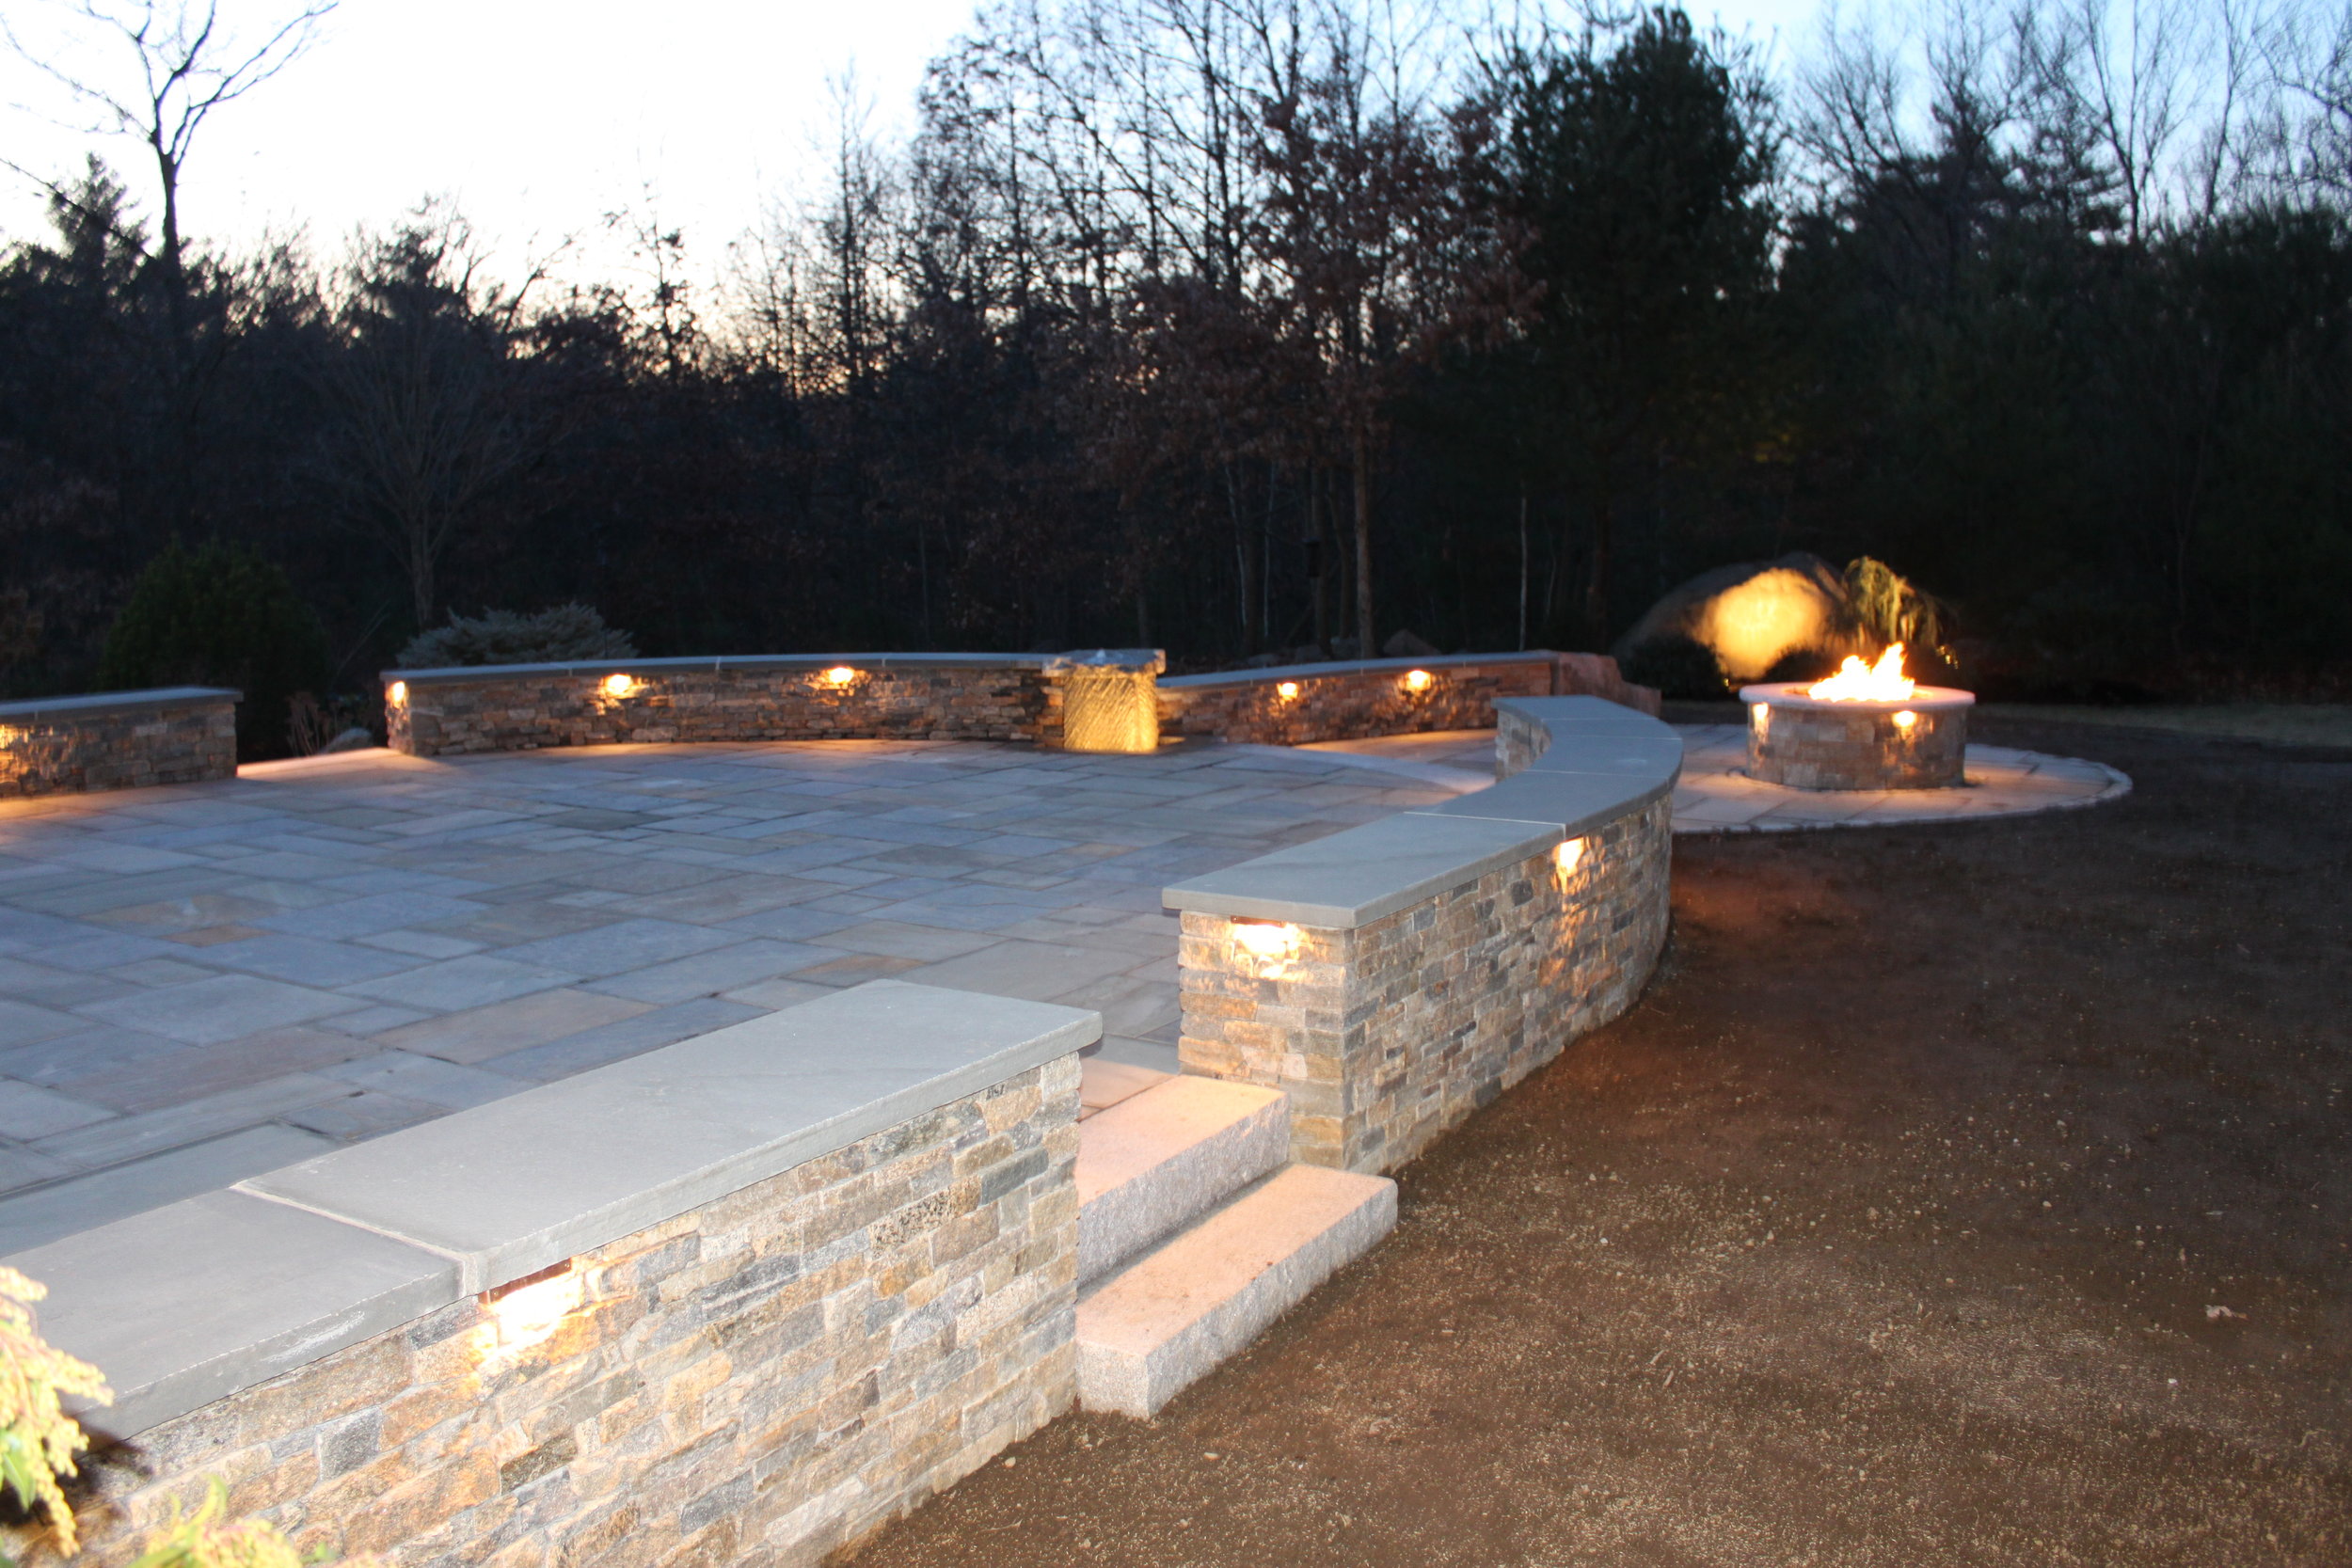 Amherst, NH leading landscaper for landscape design and masonry installation